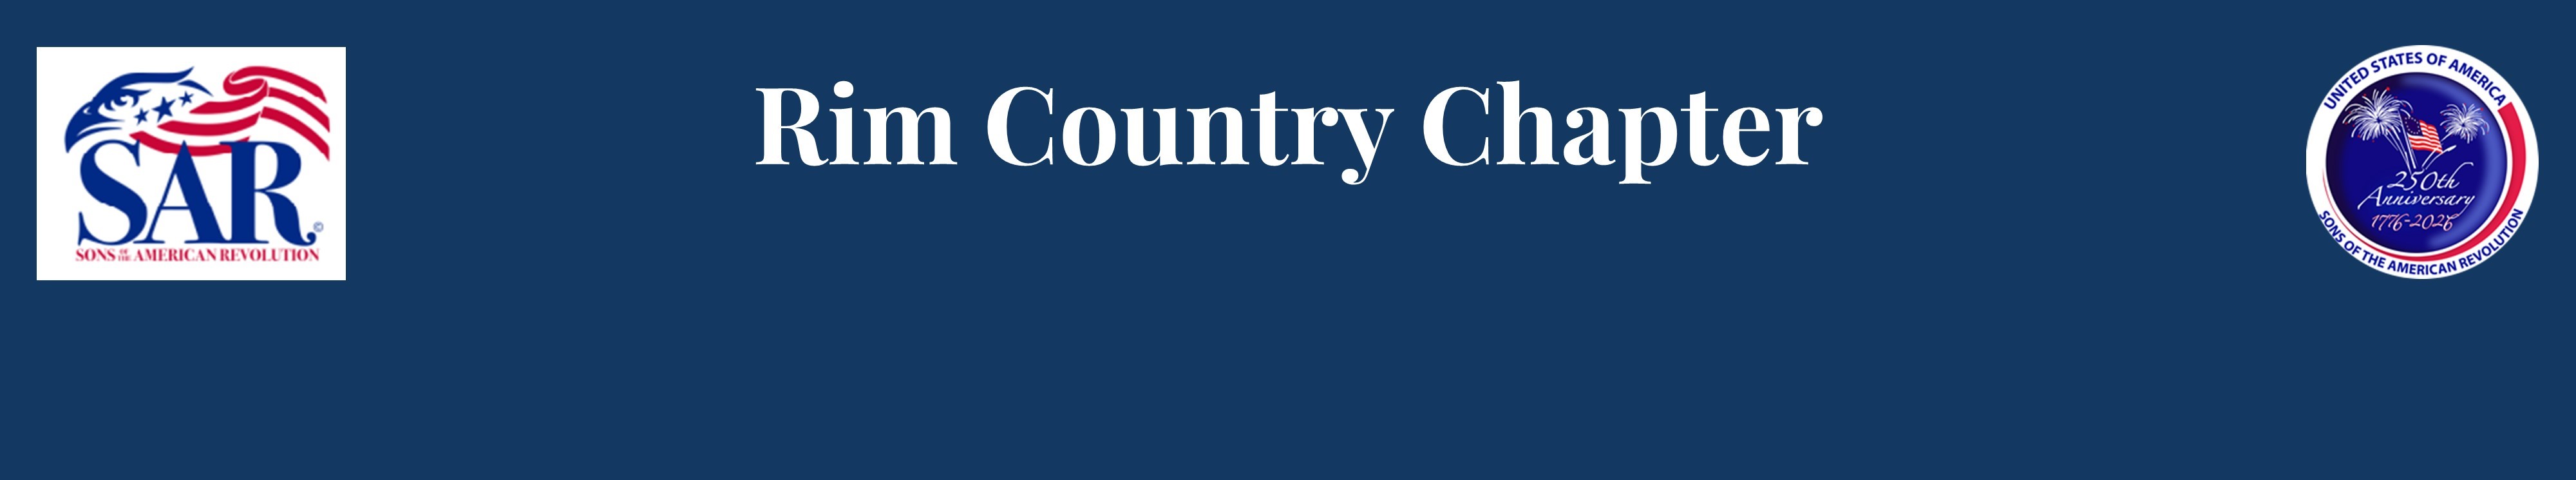 Rim Country Banner